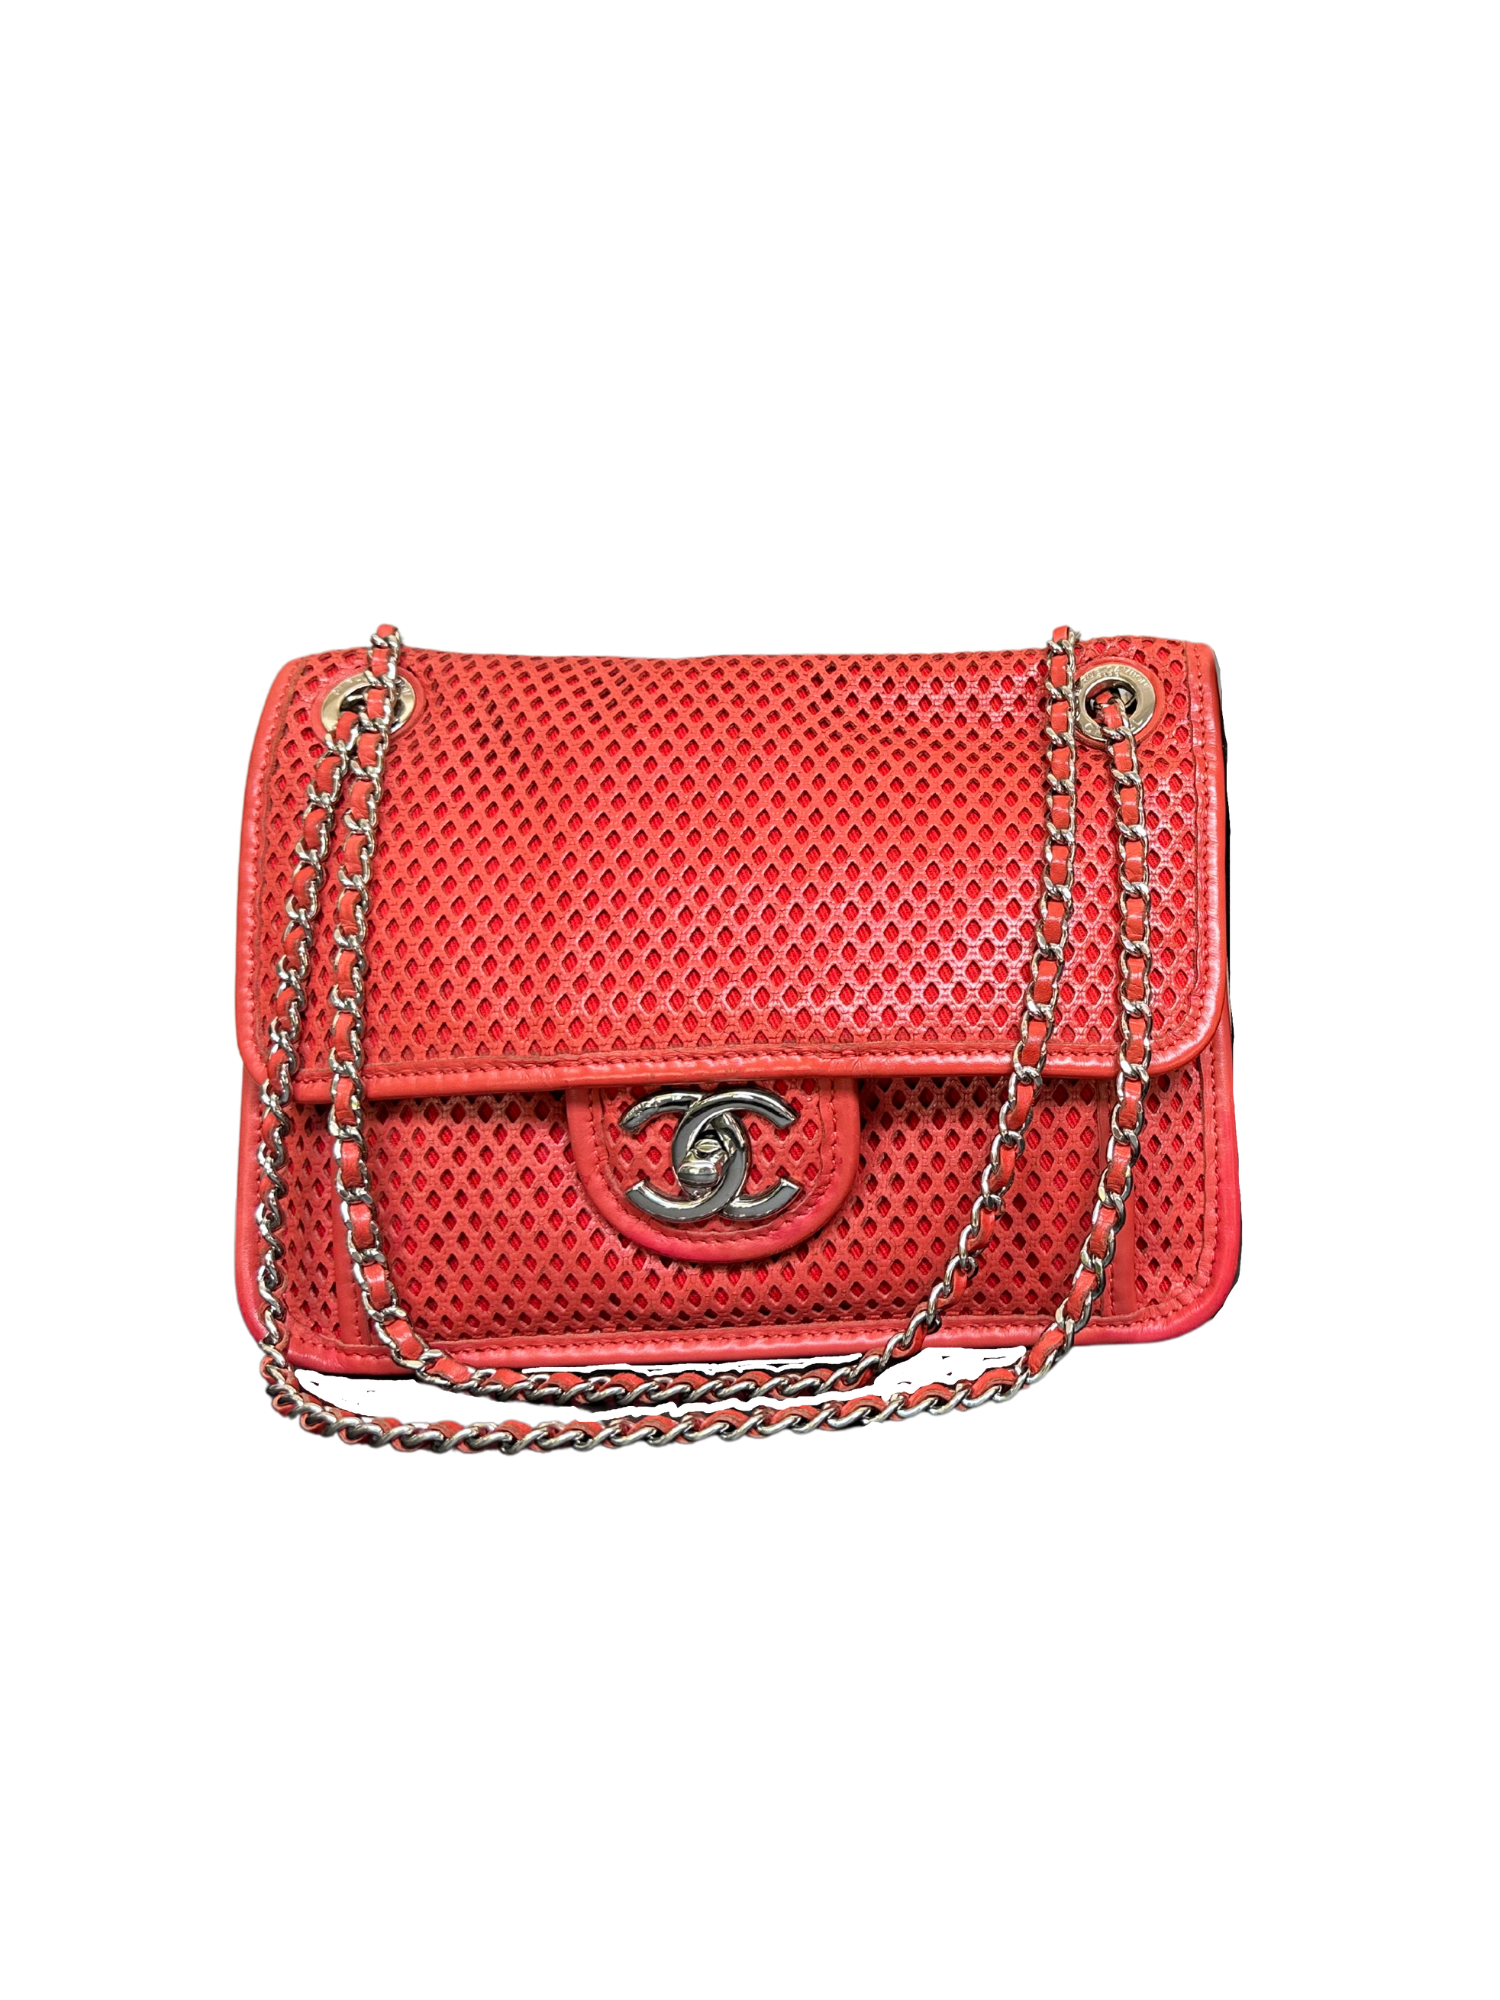 VERIFIED Authentic CHANEL Red Perforated Calfskin Leather Jumbo Flap Bag